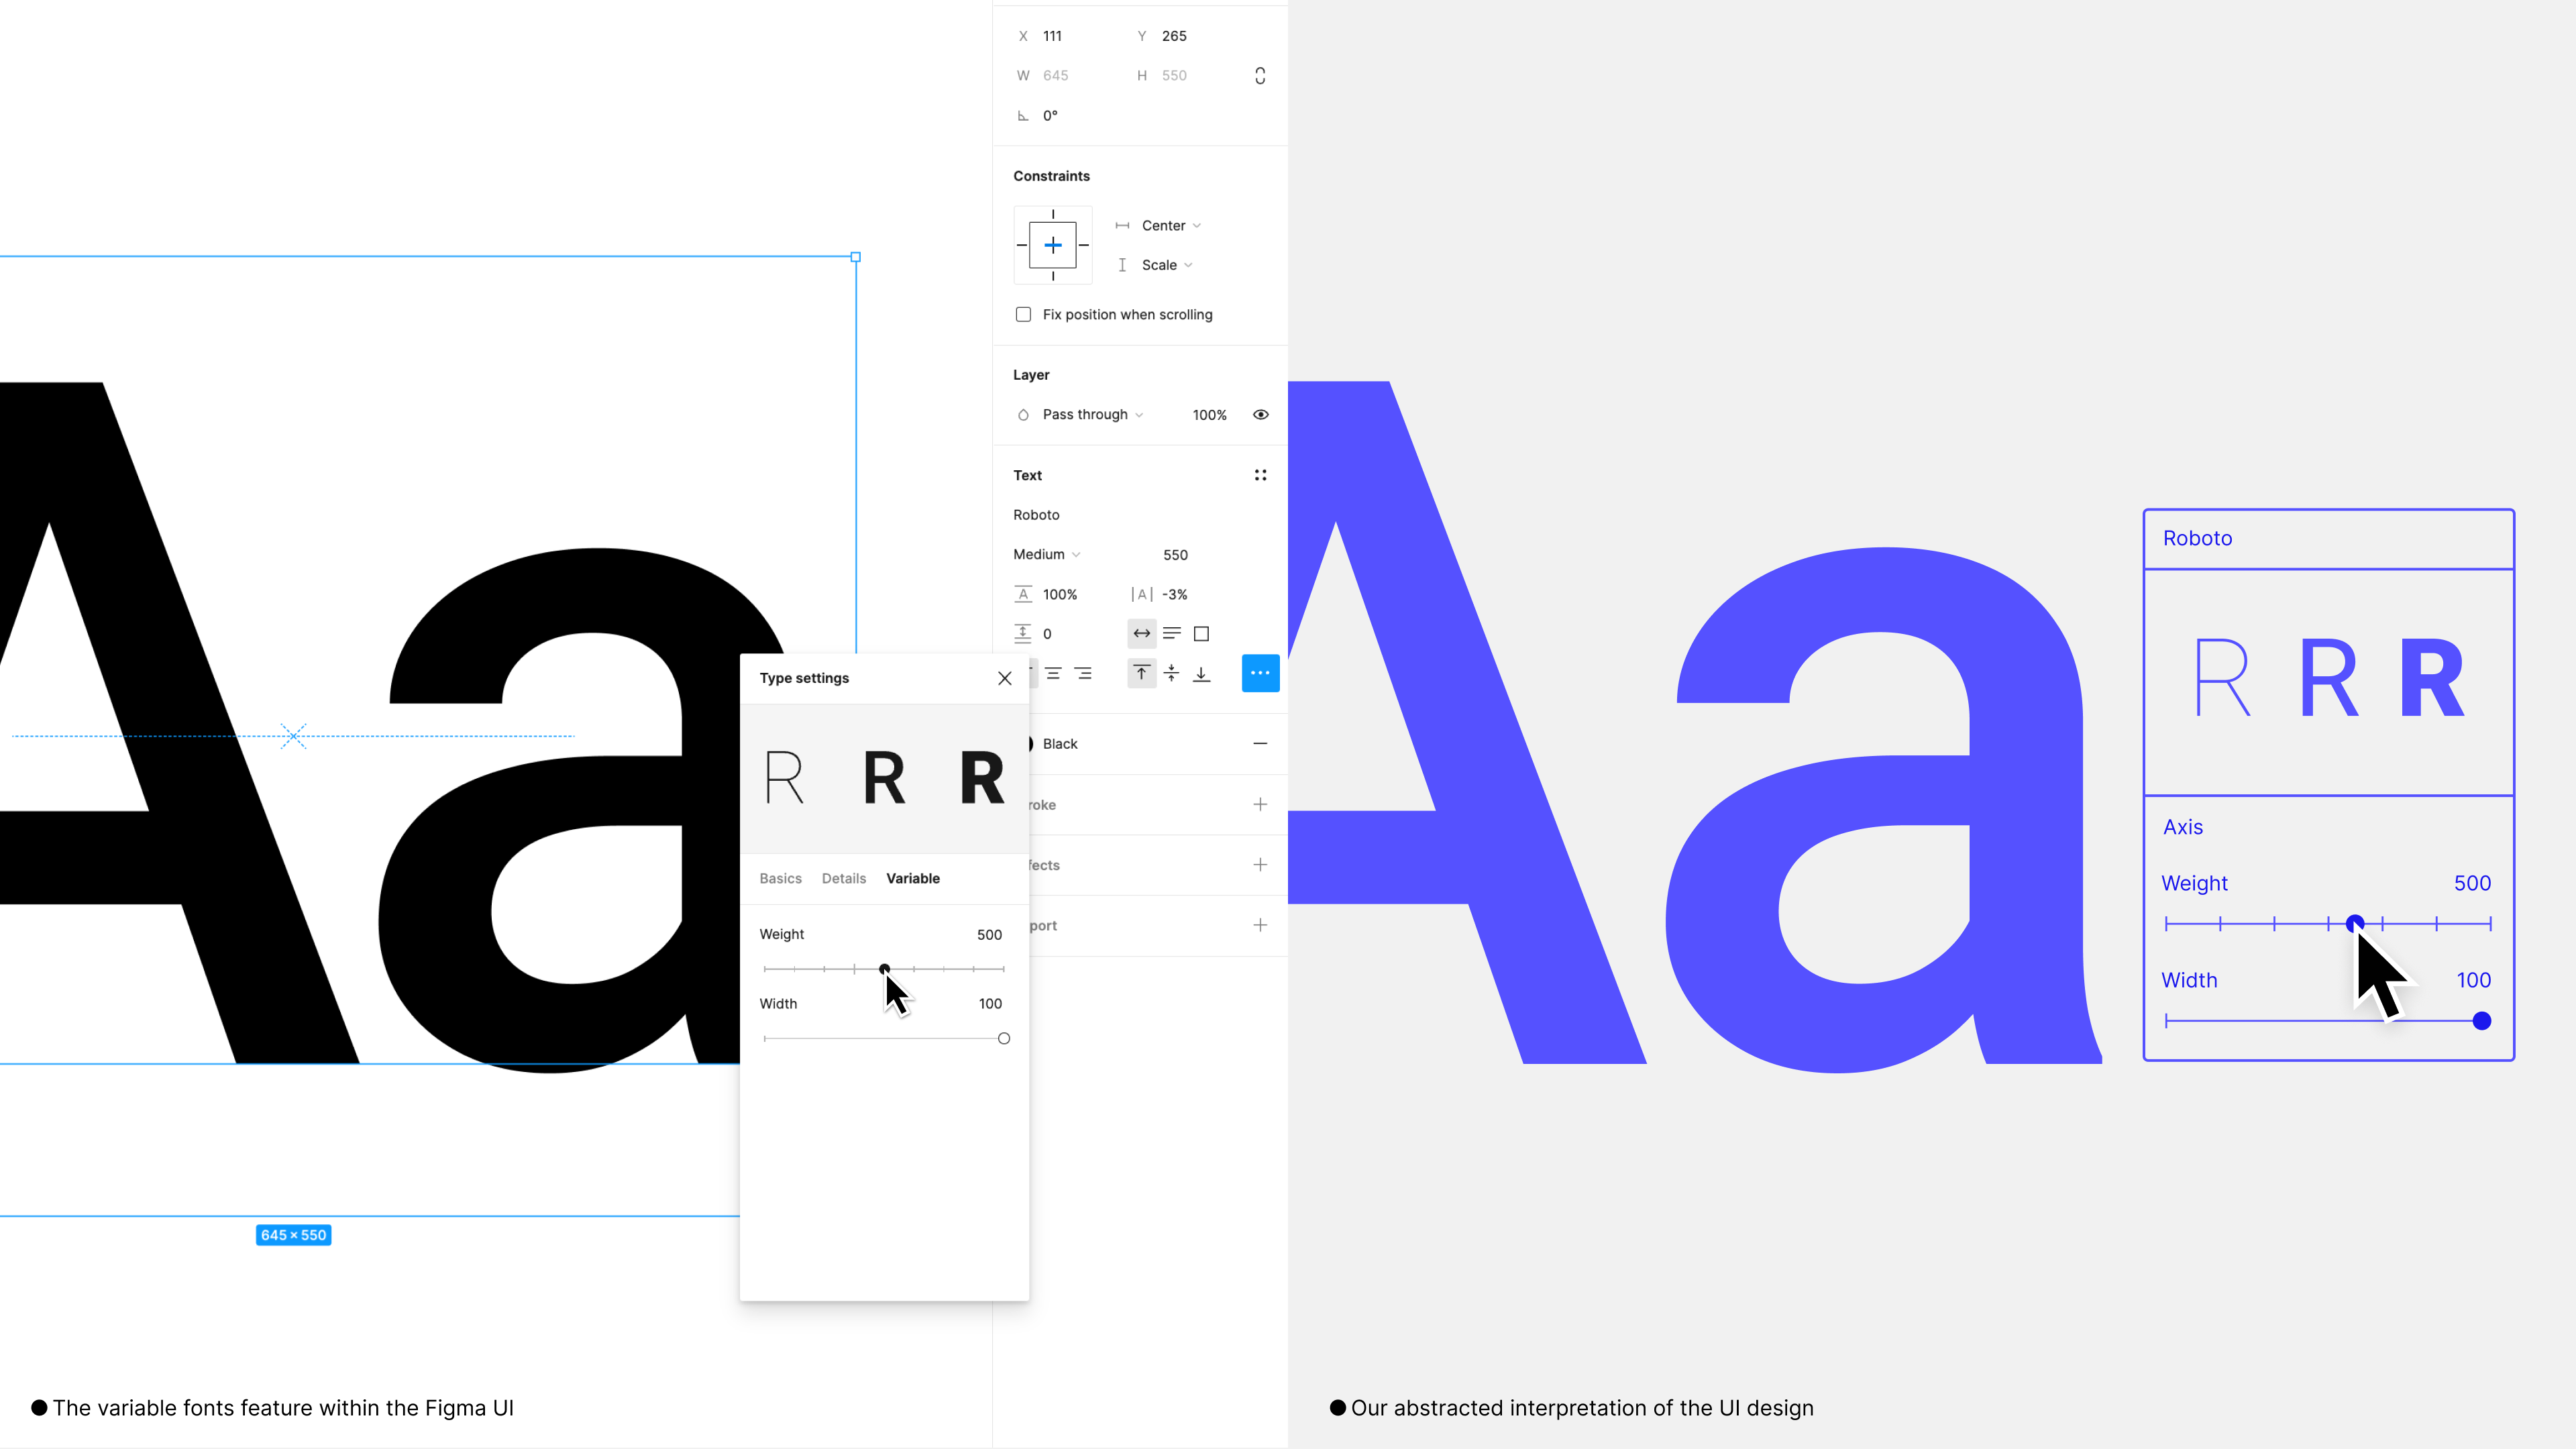 Preview of the variable fonts feature within the Figma app vs. our abstracted design